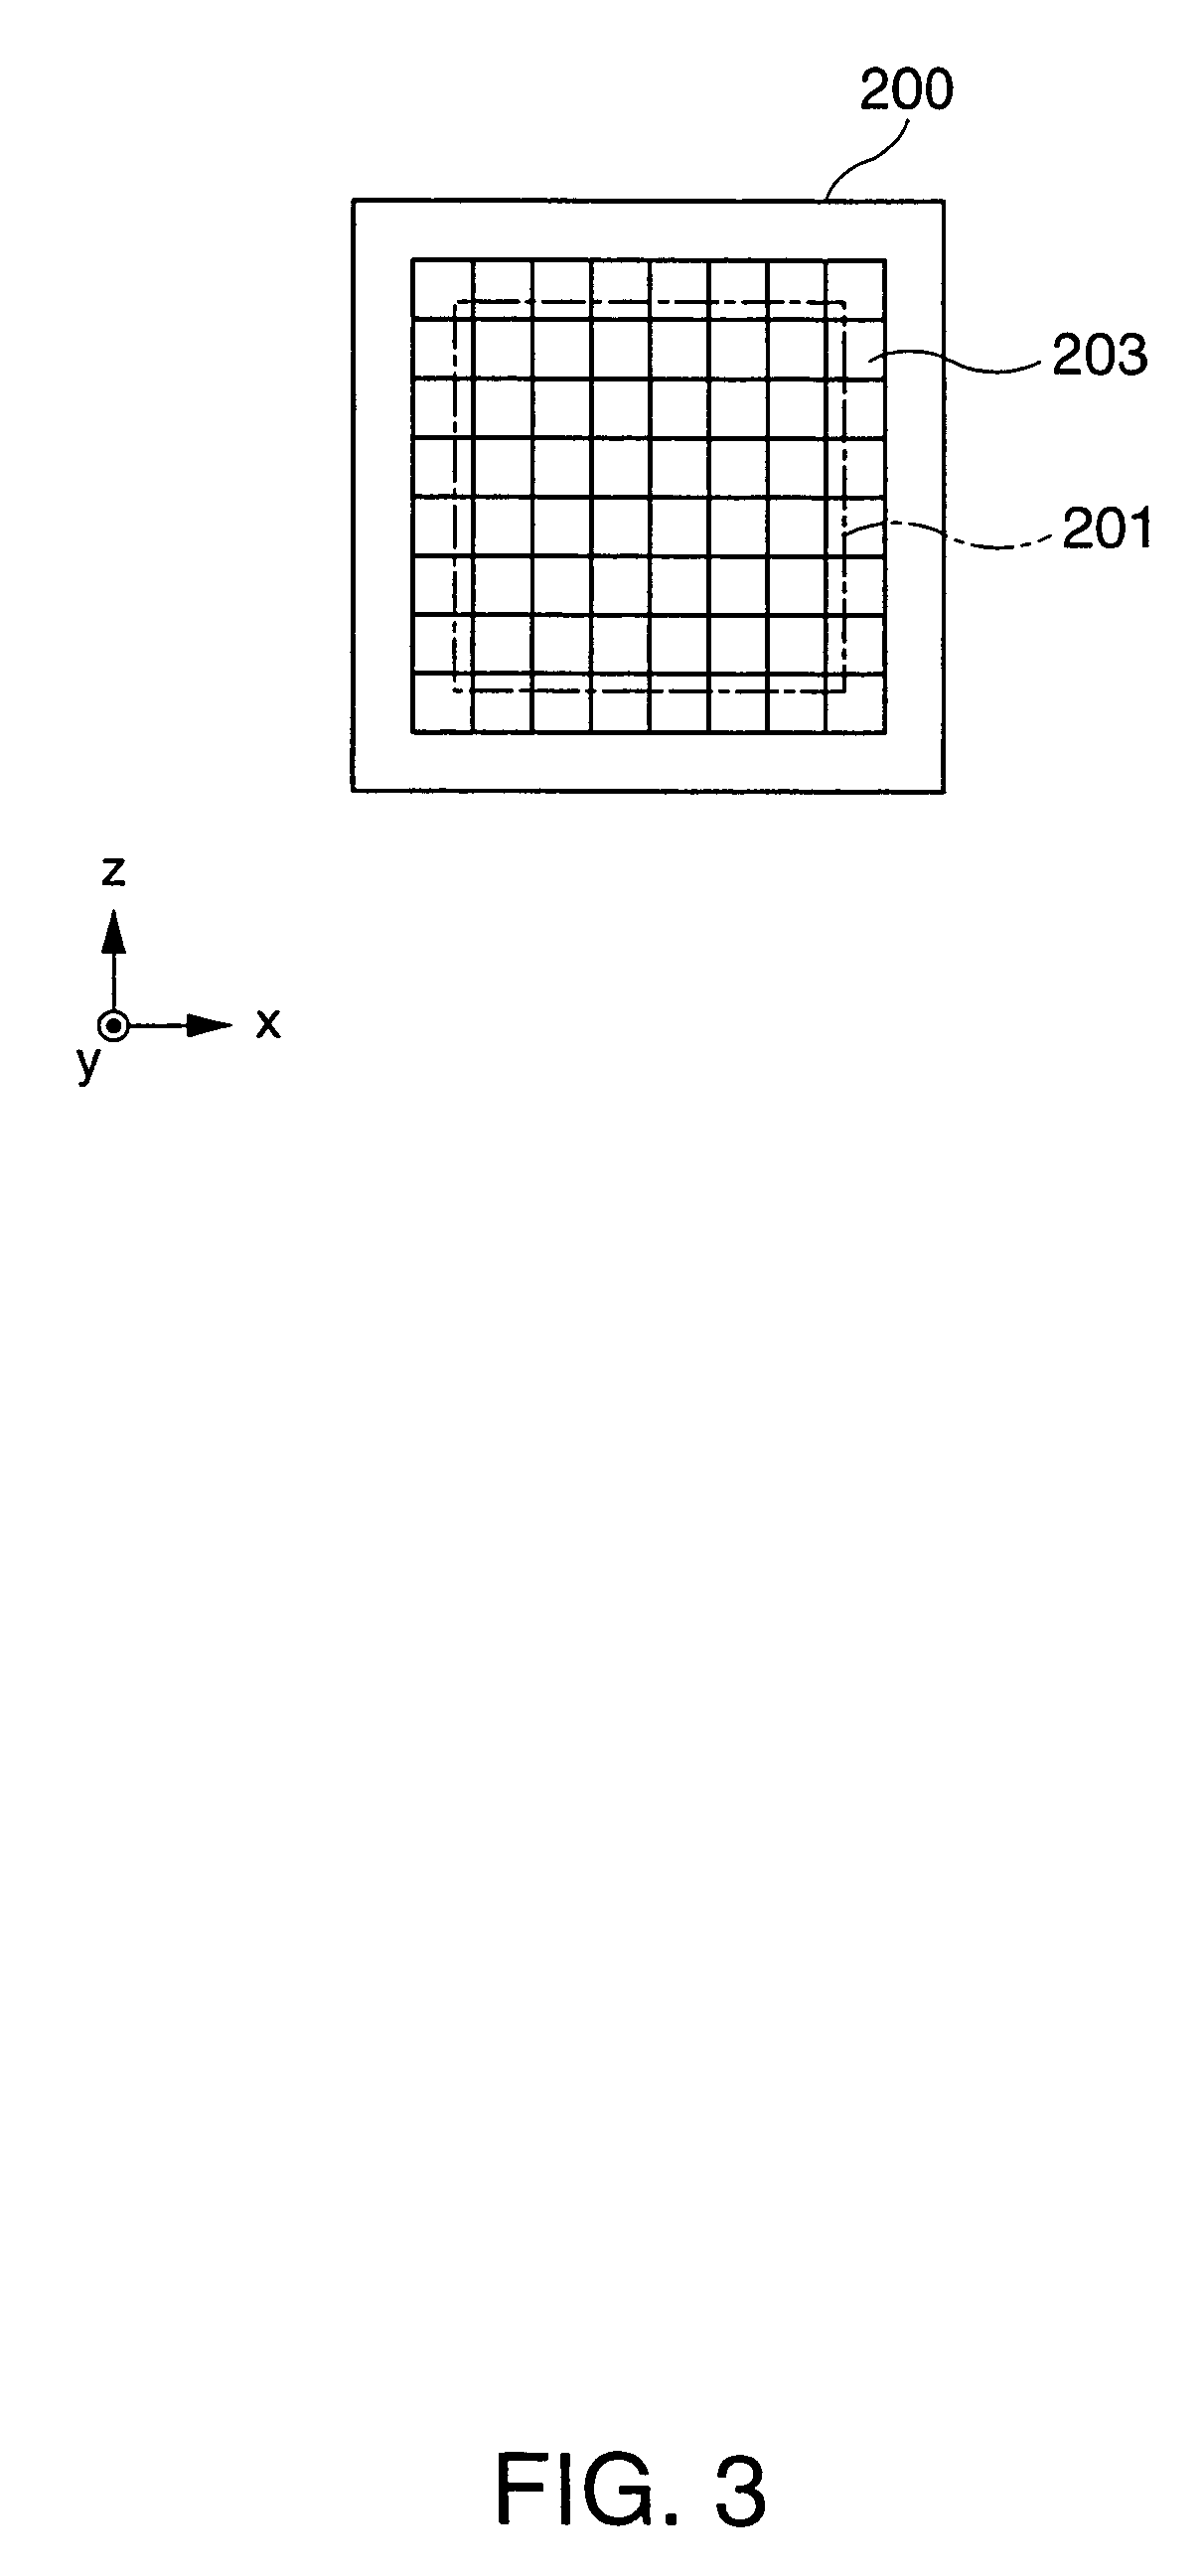 Method of manufacturing electronic device including aligning first substrate, second substrate and mask, and transferring object from first substrate to second substrate, including irradiating object on first substrate with light through mask